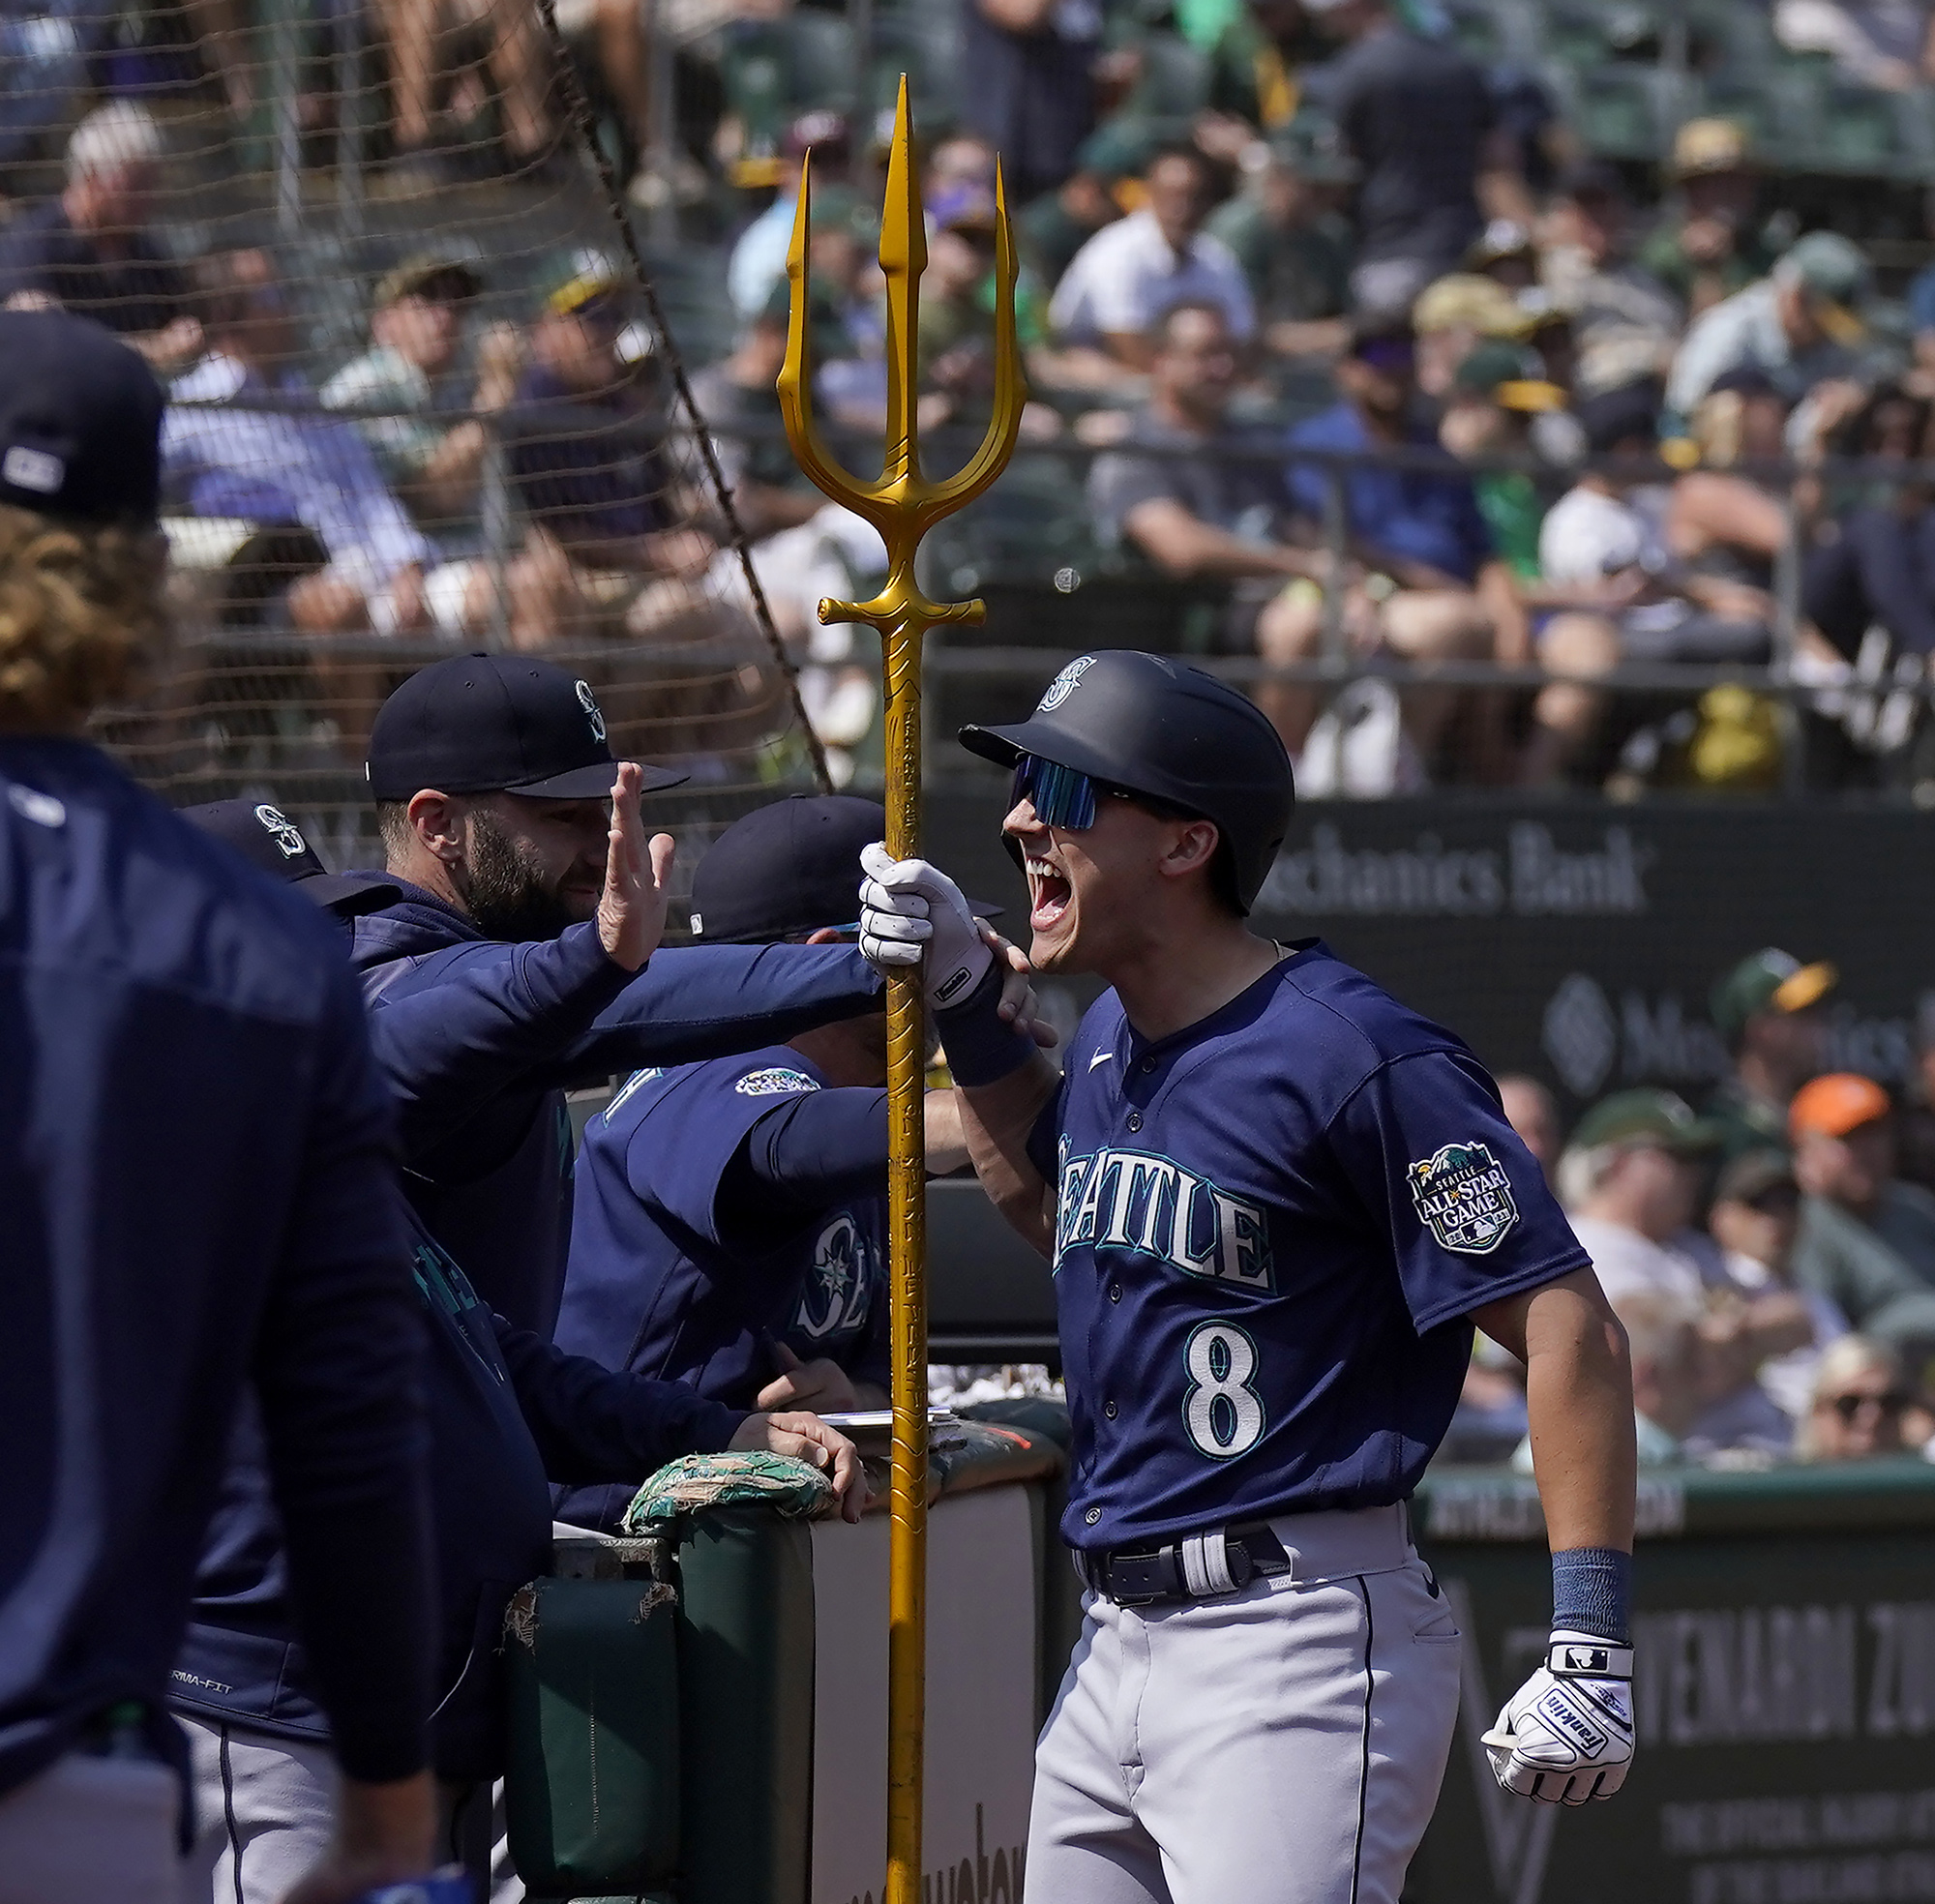 Mariners have resources to make moves after 88-win season but it